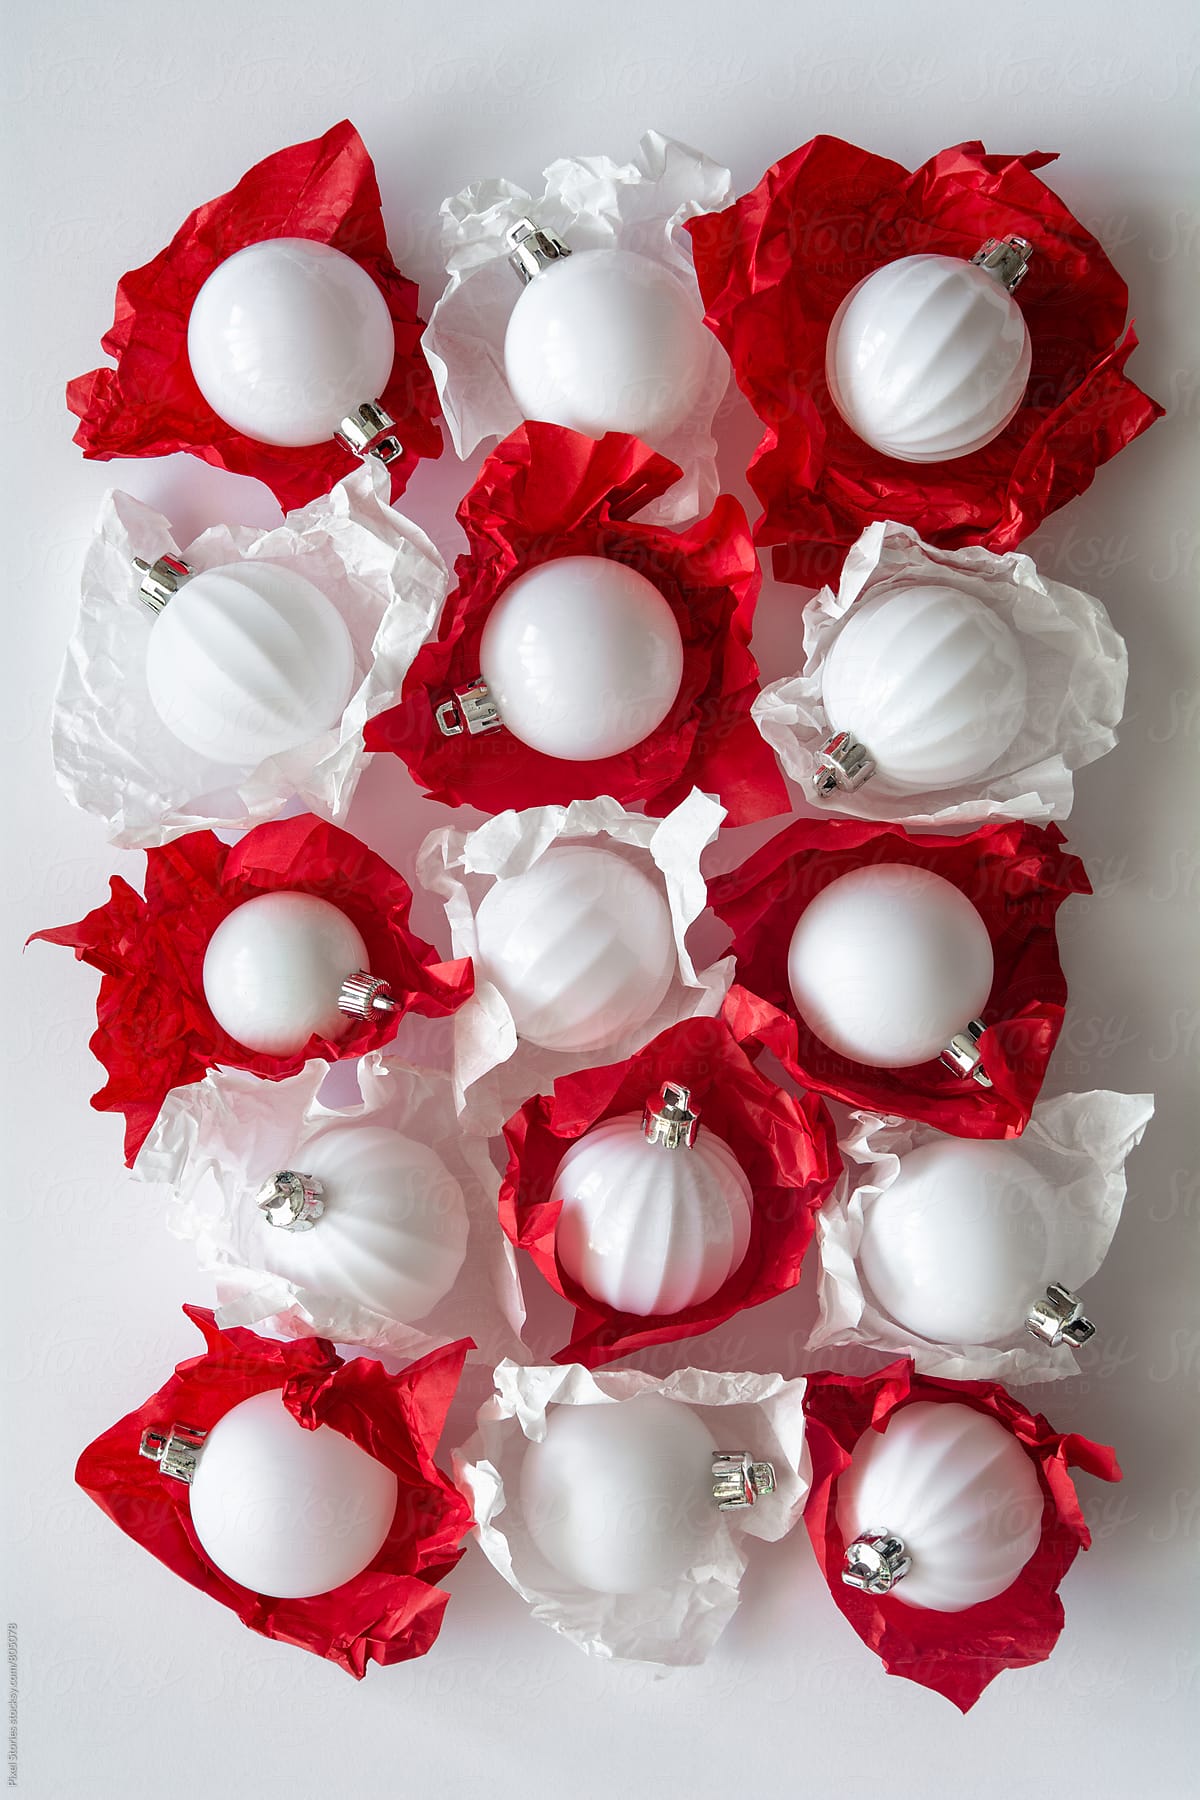 White baubles wrapped in tissue paper